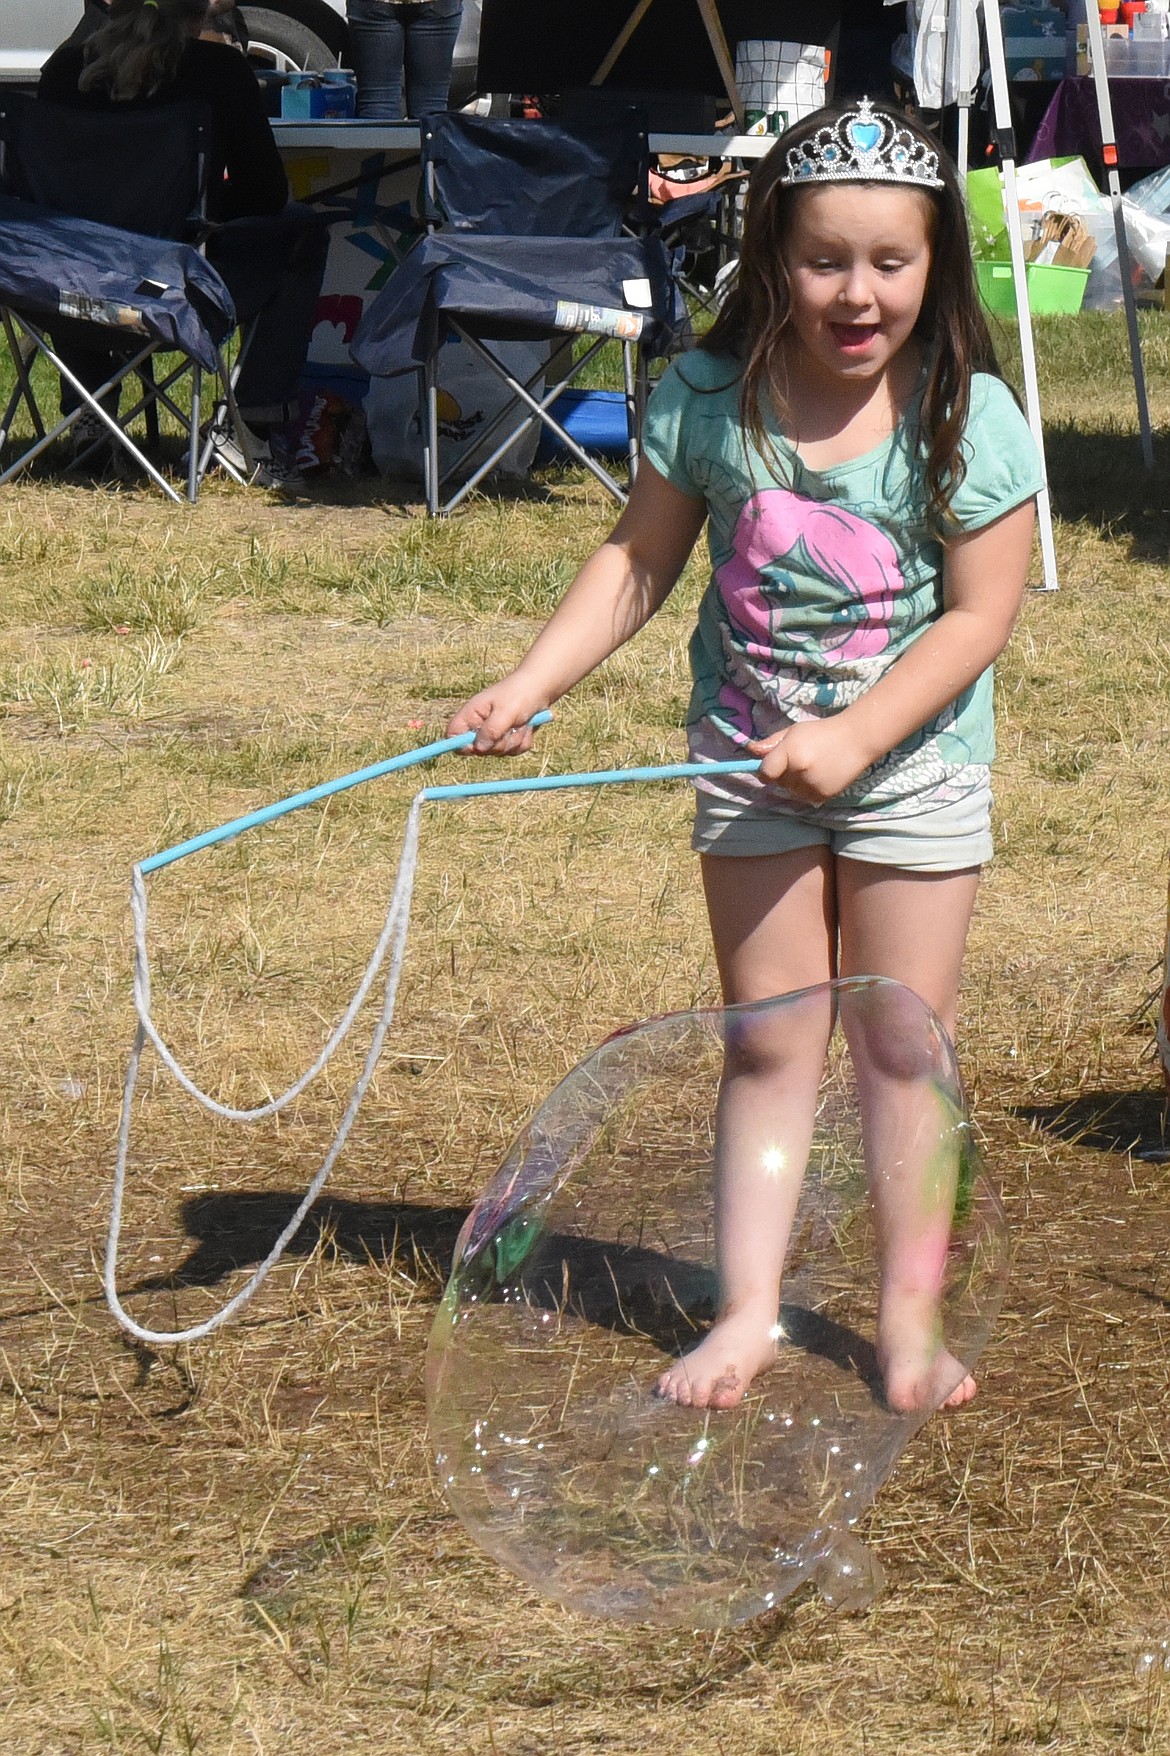 This little princess is thrilled with the big bubble she has created. This was one of the most popular events for kids at Harvest Fest in Ronan. (Marla Hall/Lake County Leader)